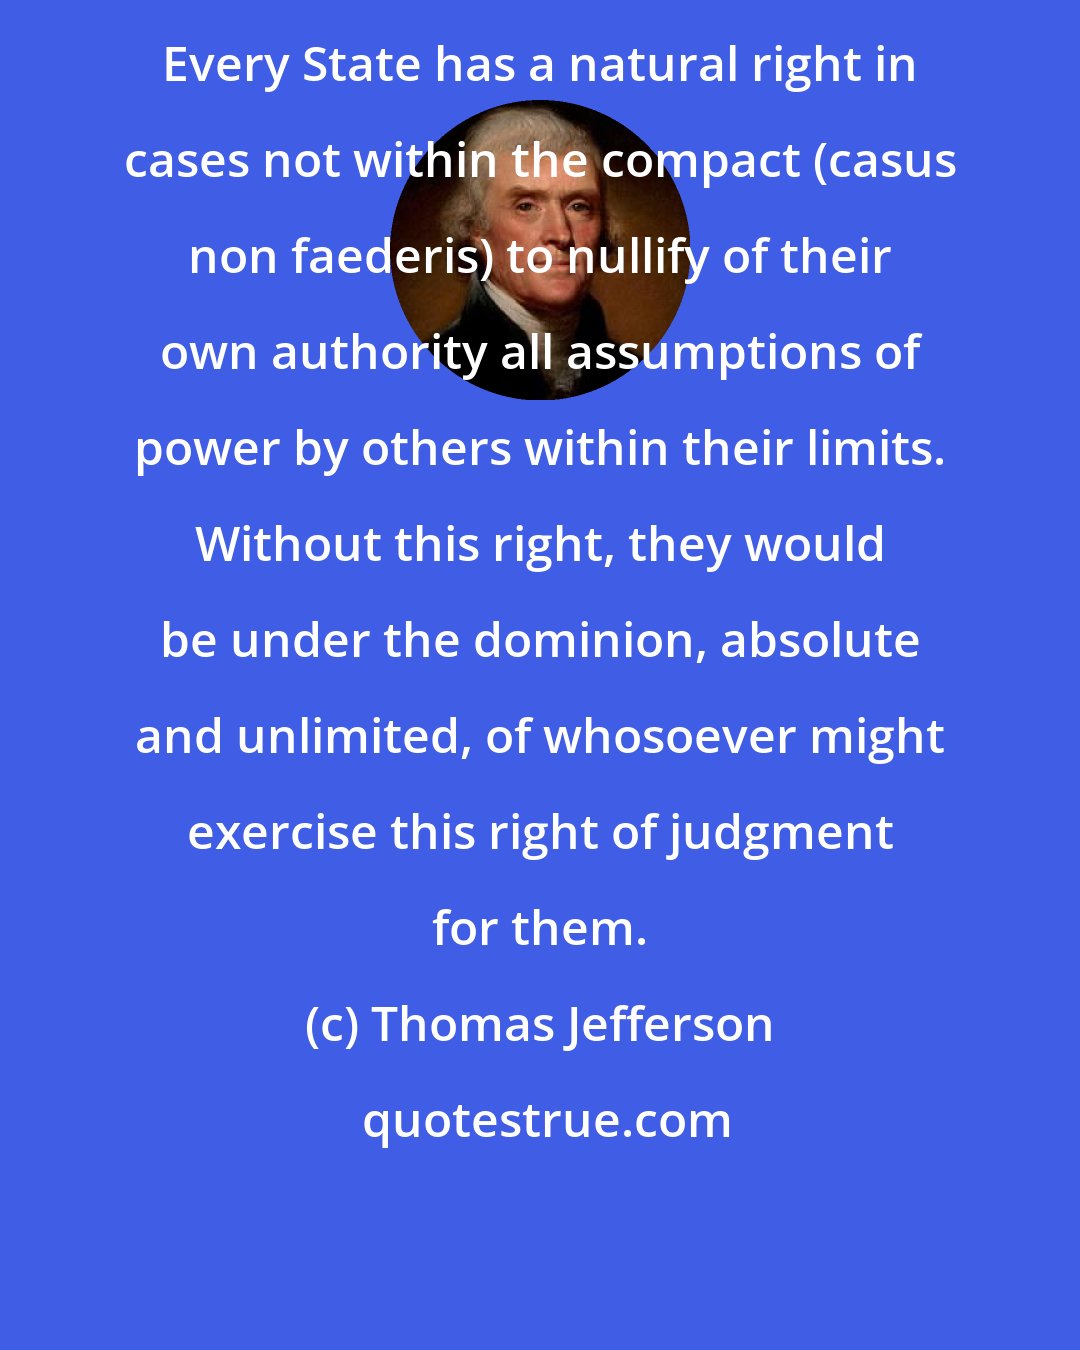 Thomas Jefferson: Every State has a natural right in cases not within the compact (casus non faederis) to nullify of their own authority all assumptions of power by others within their limits. Without this right, they would be under the dominion, absolute and unlimited, of whosoever might exercise this right of judgment for them.